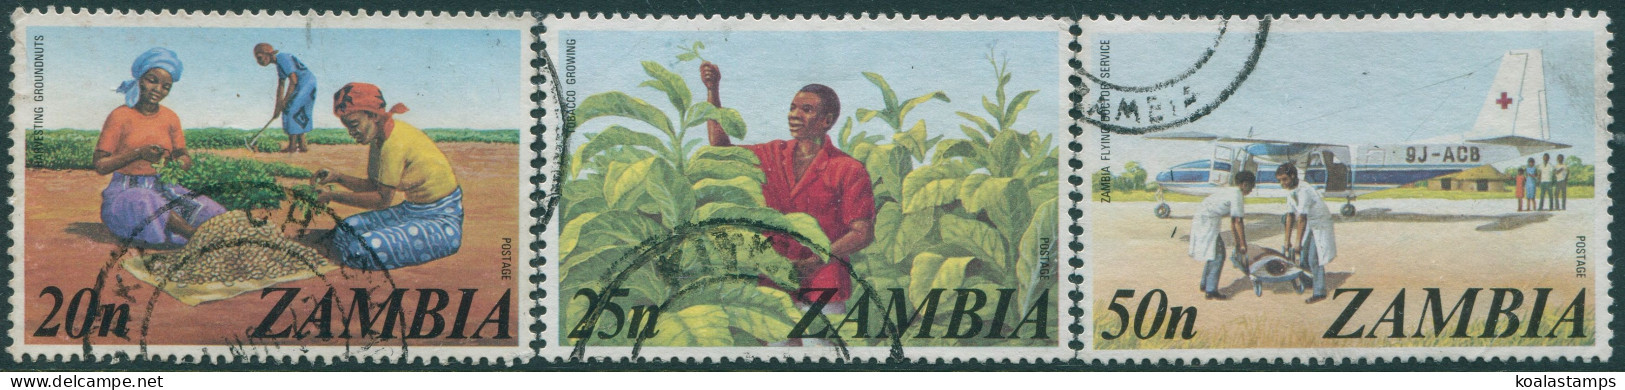 Zambia 1975 SG235-237 Ground Nuts Tobacco And Royal Flying Doctor (3) FU - Zambie (1965-...)